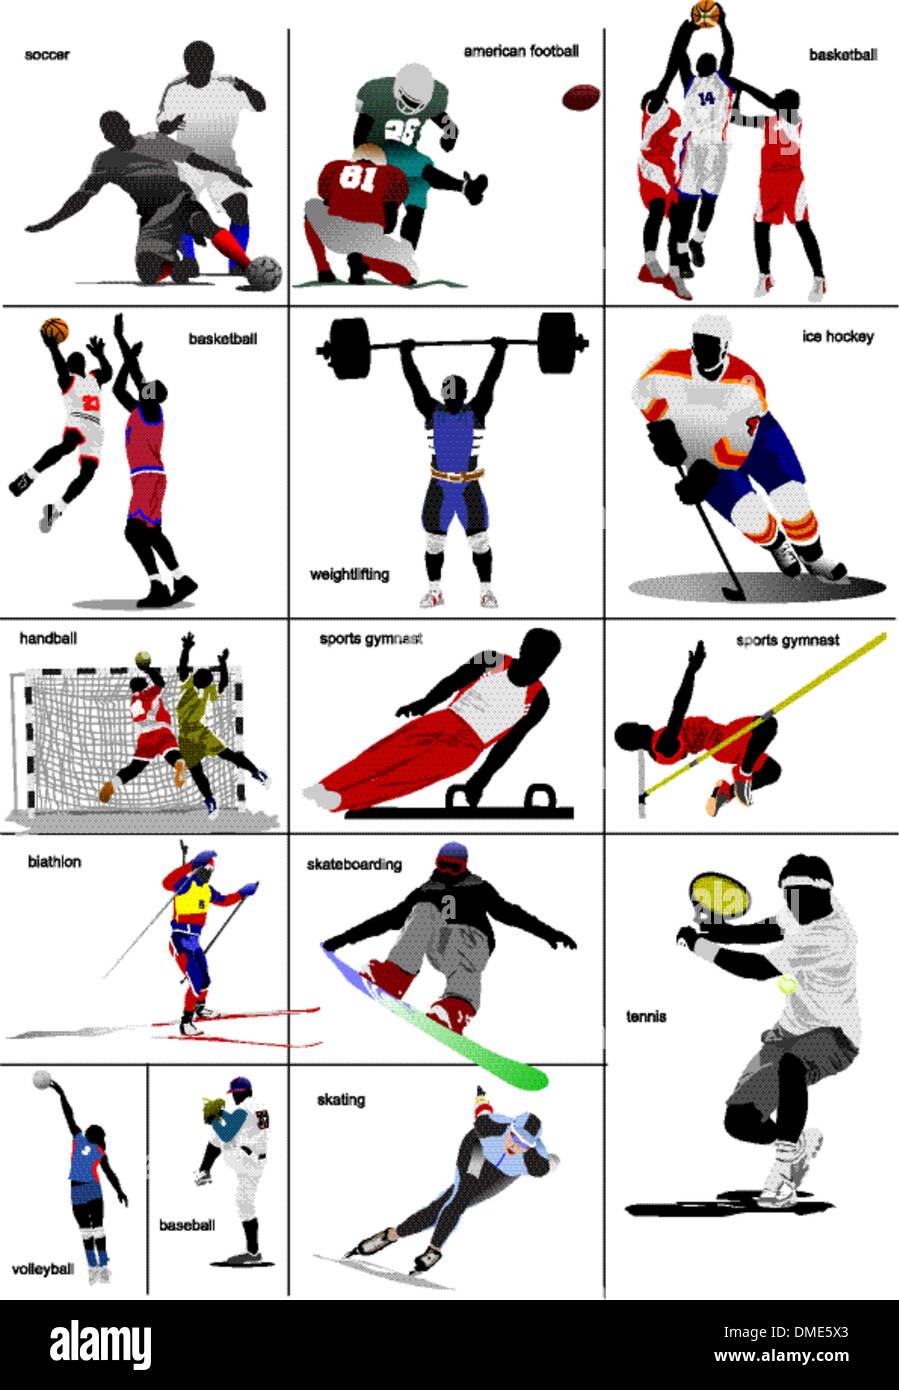 kinds of sports